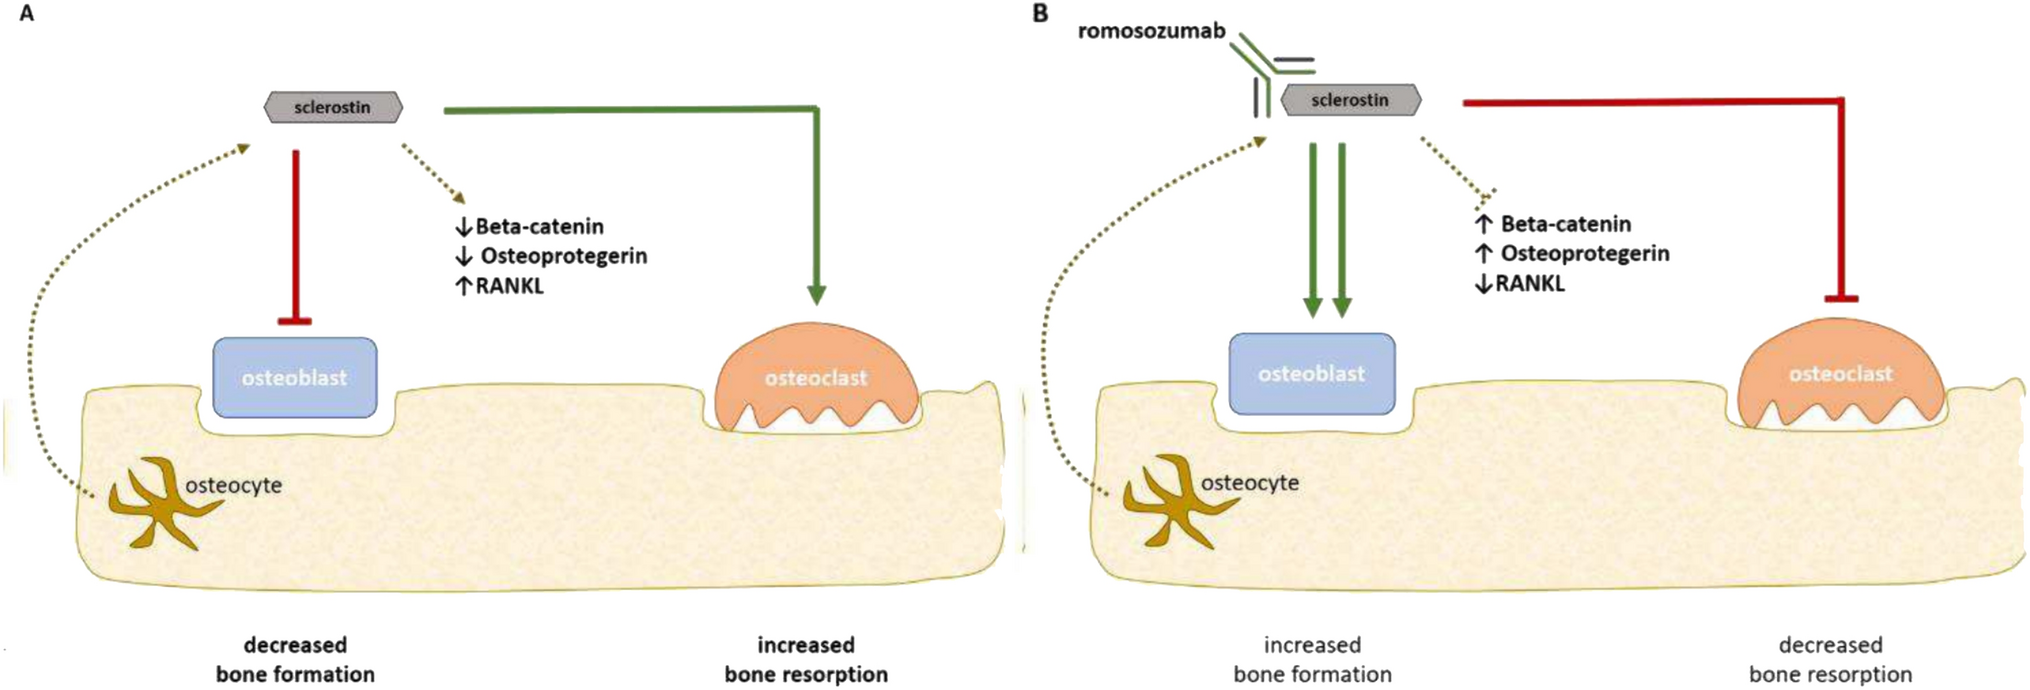 A practical approach for anabolic treatment of bone fragility with romosozumab